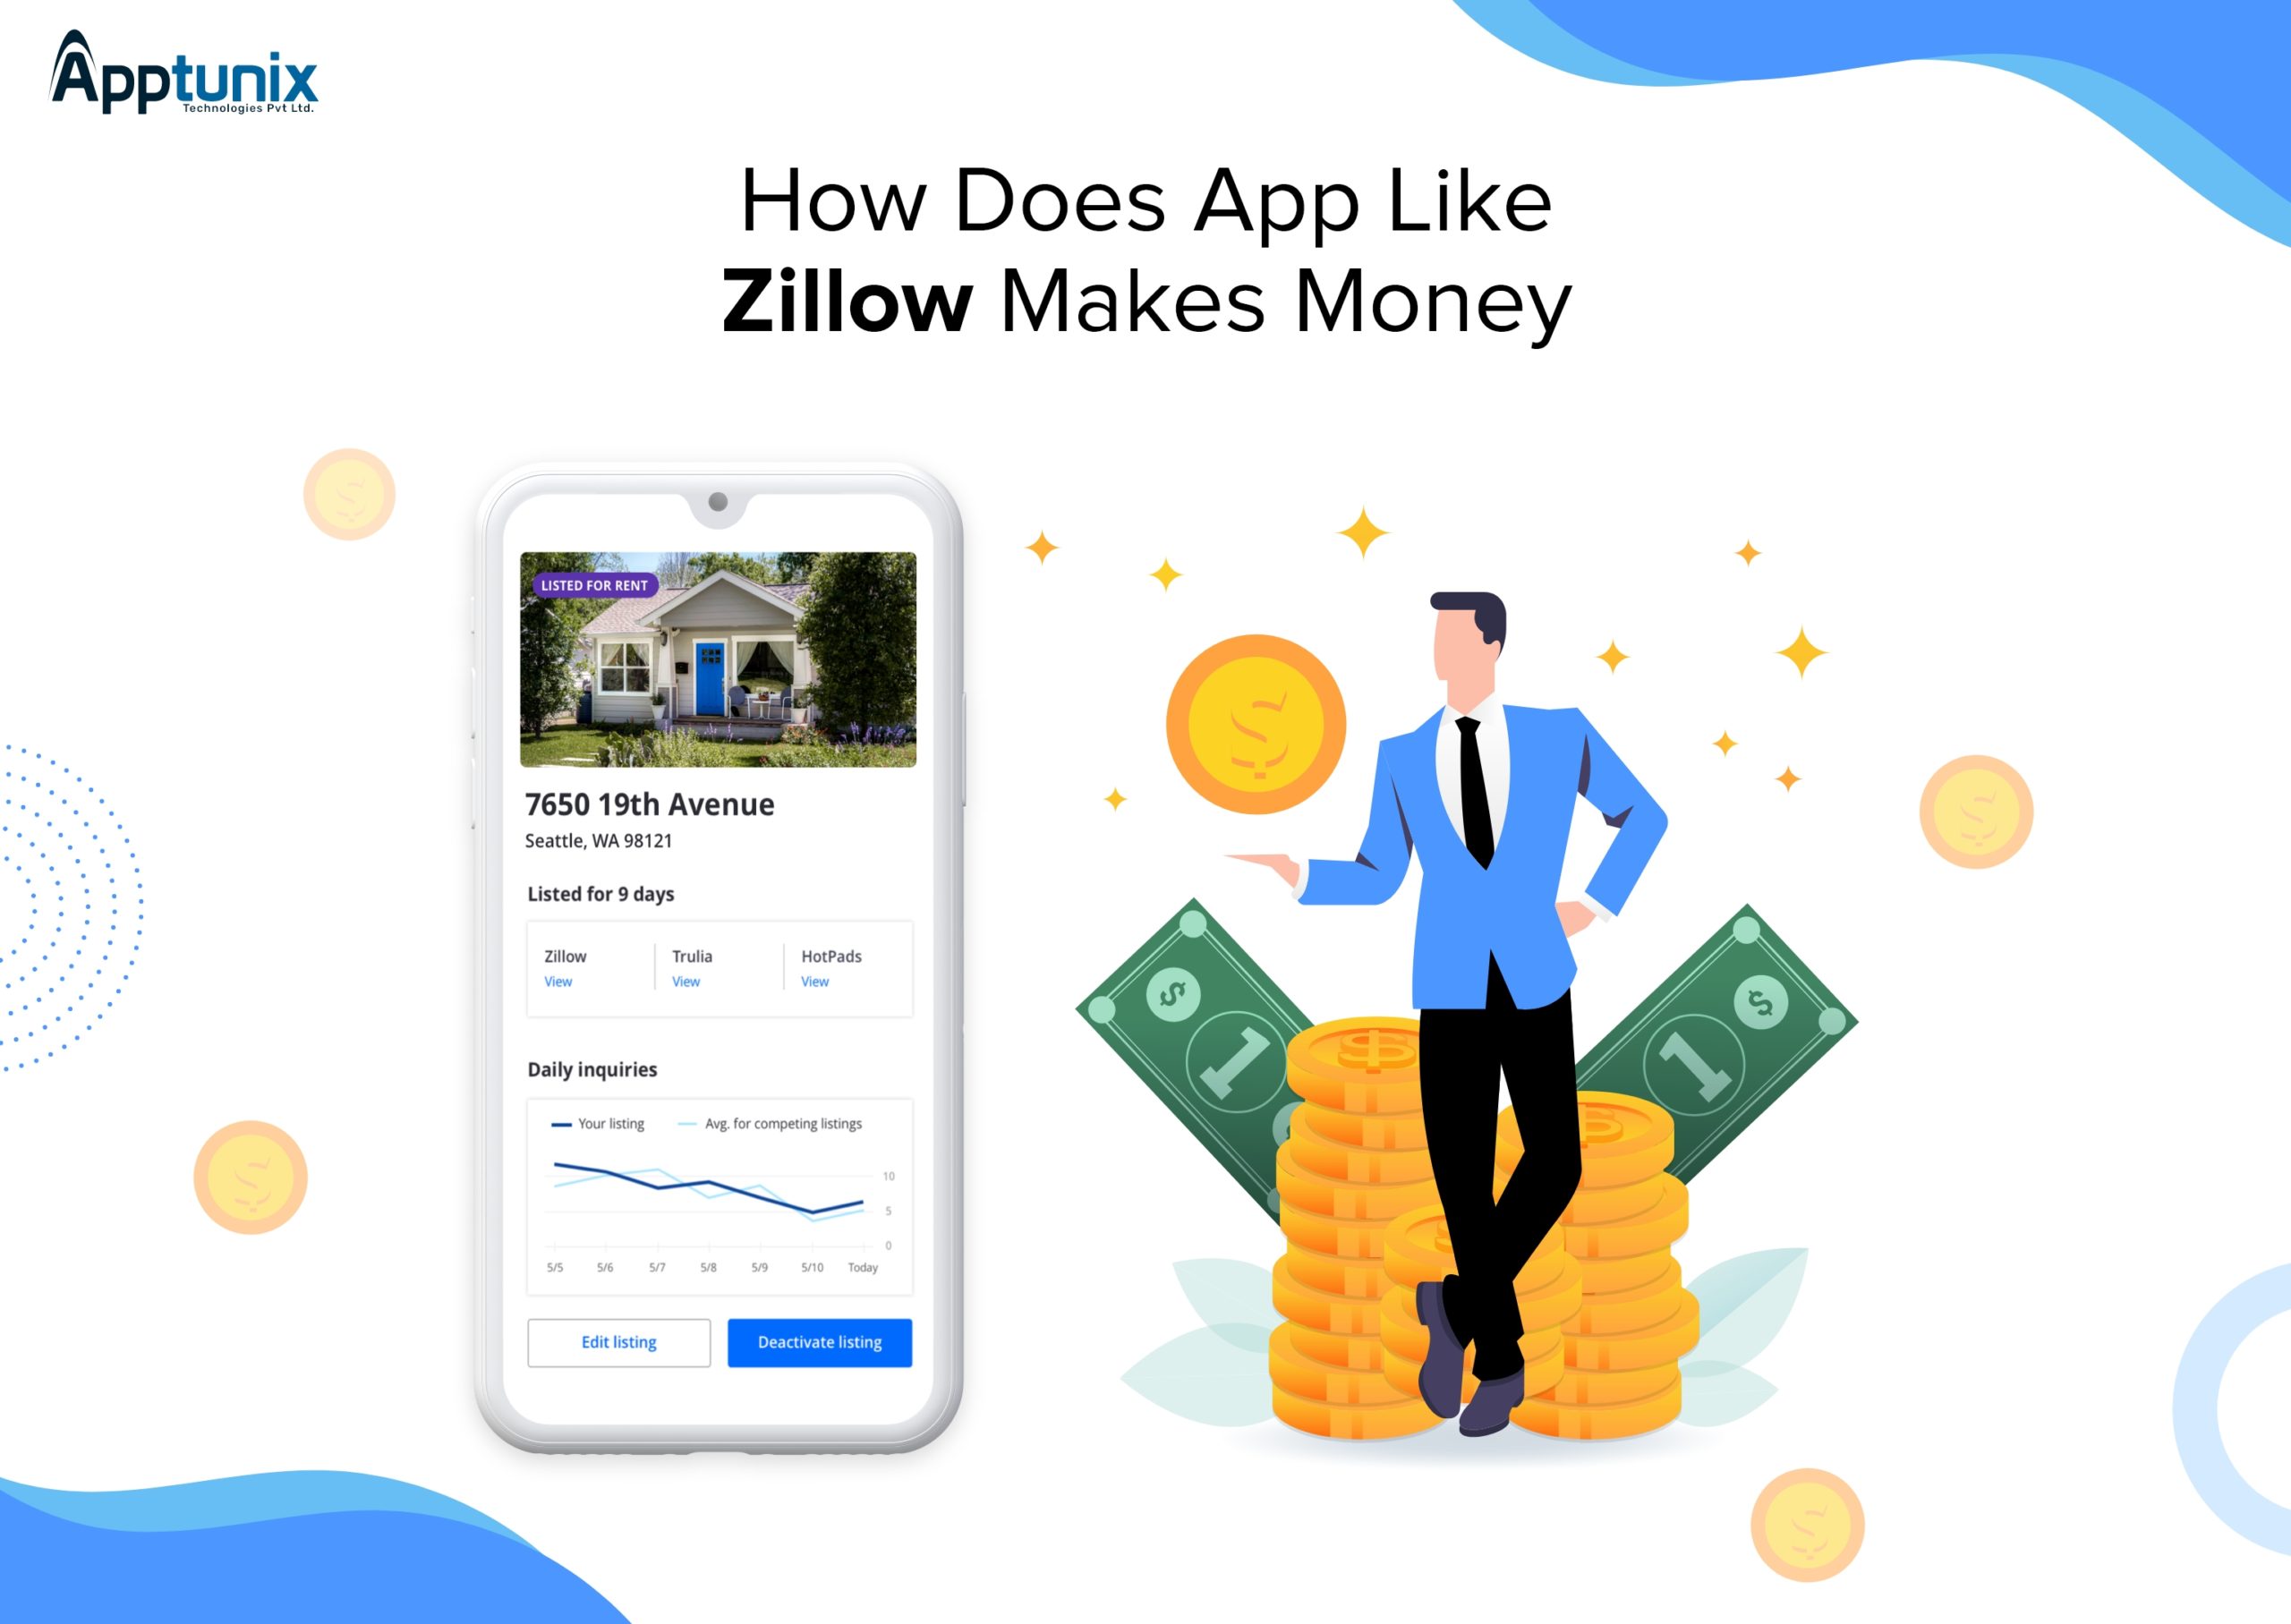 How does Zillow makes money